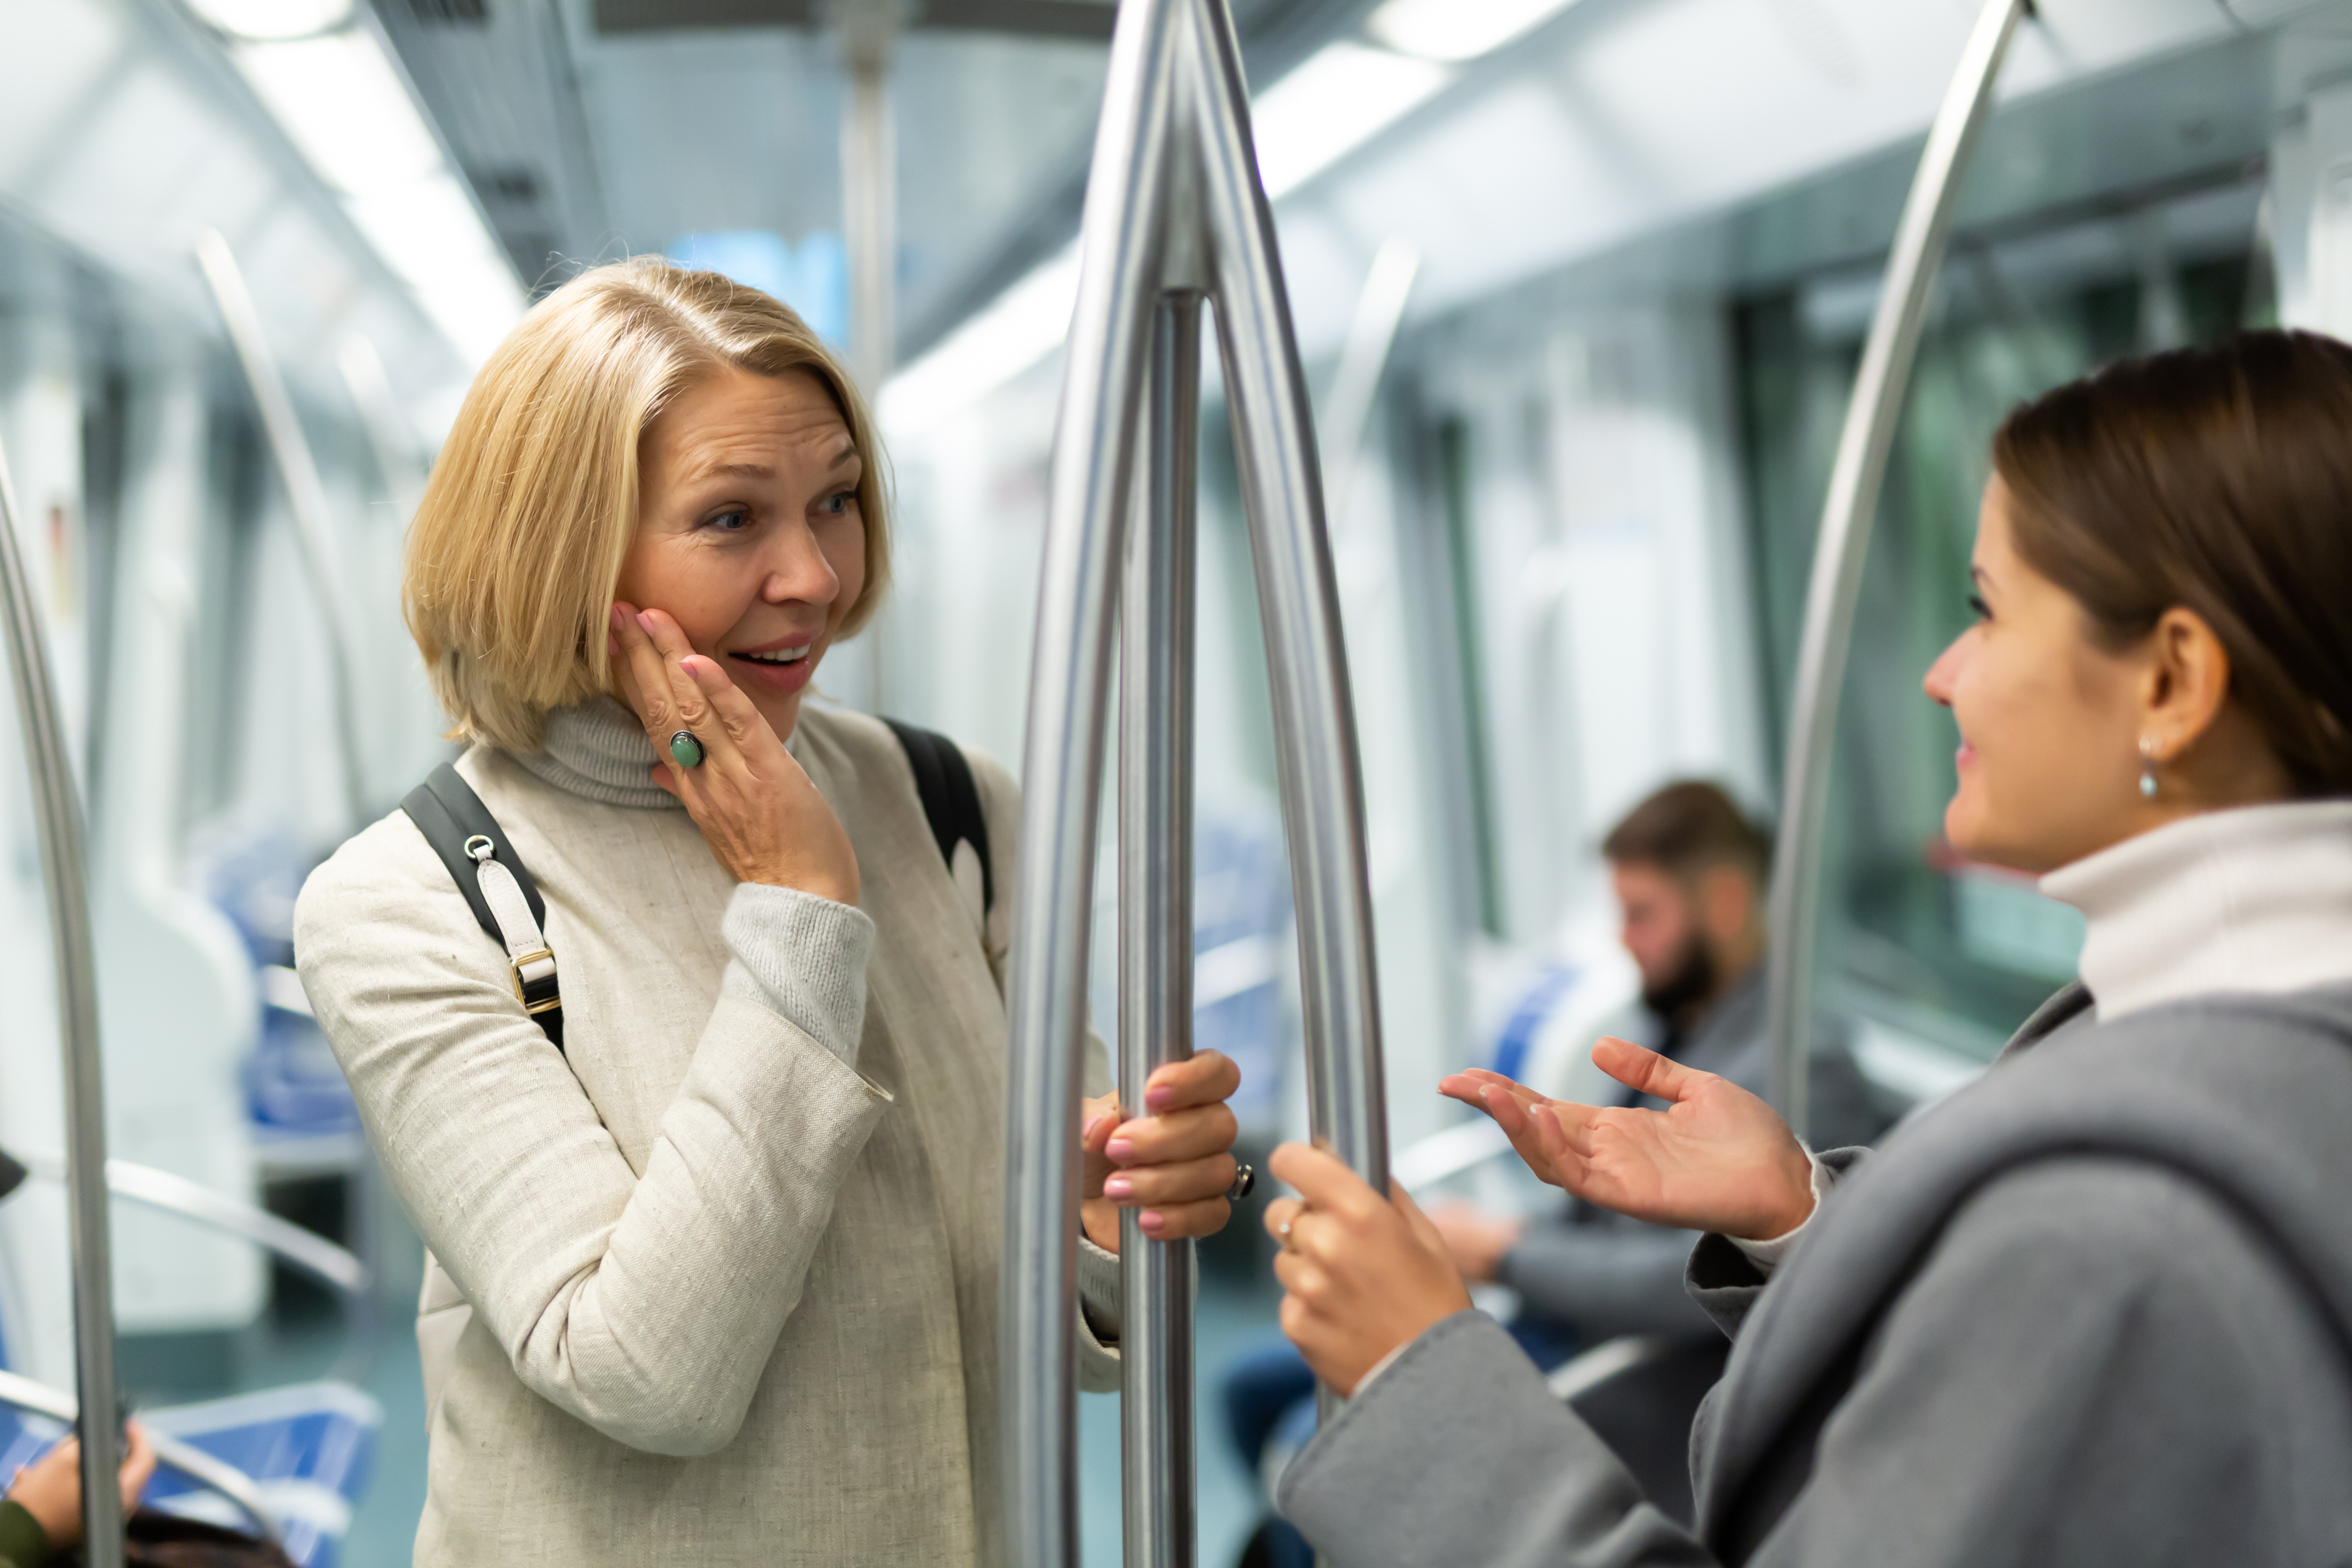 Two women are conversing and smiling while standing inside a subway train, both holding onto poles for support. Other passengers are seated in the background